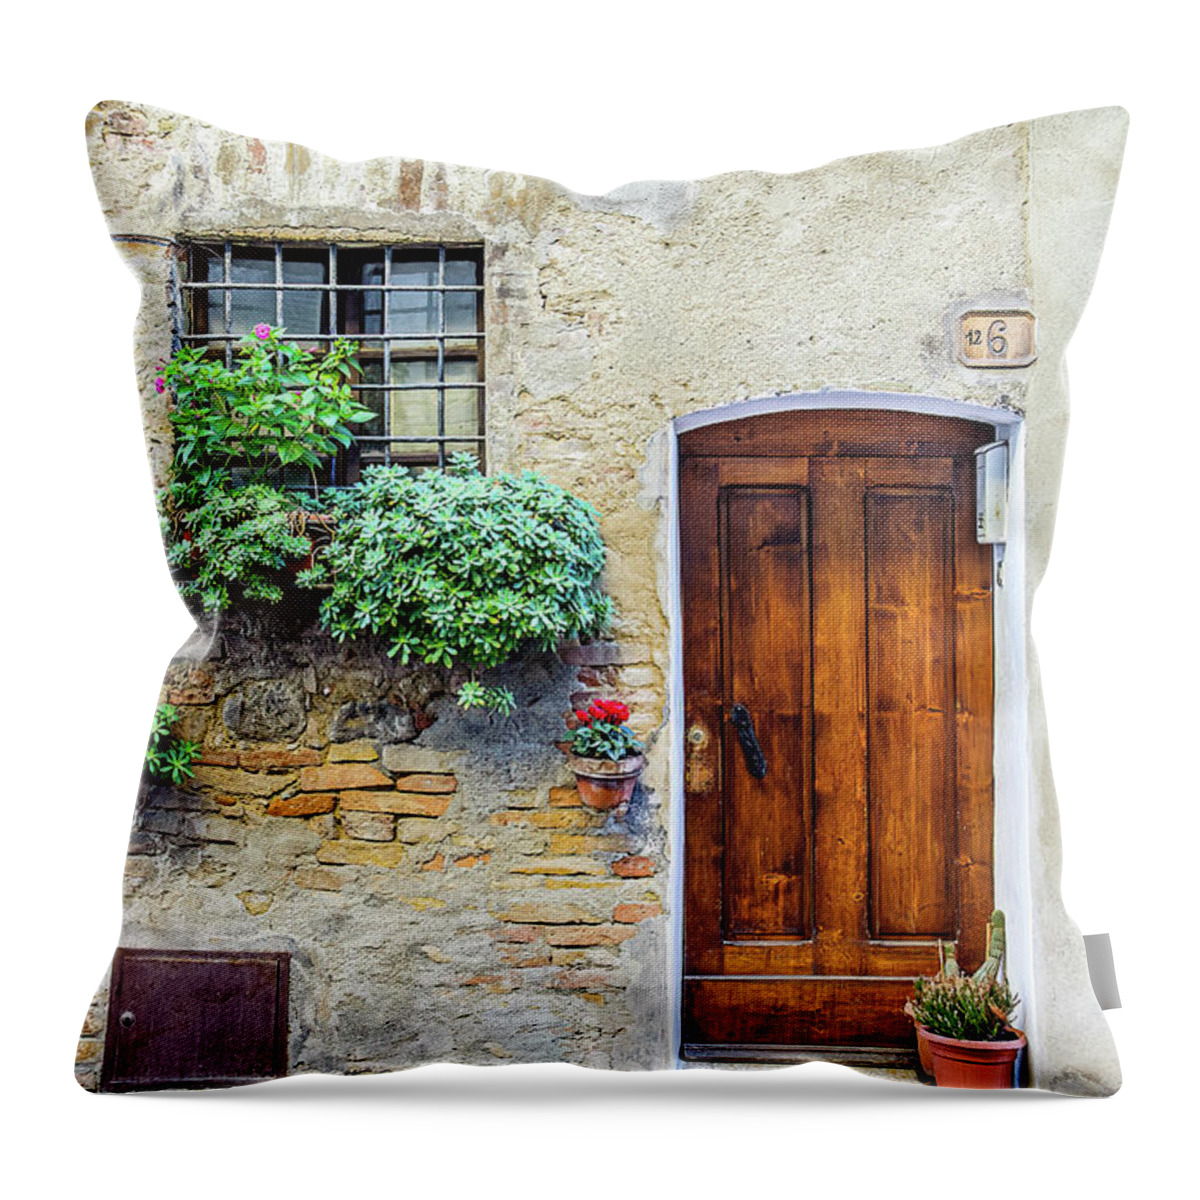 Italy Throw Pillow featuring the photograph Benvenuto by Marla Brown